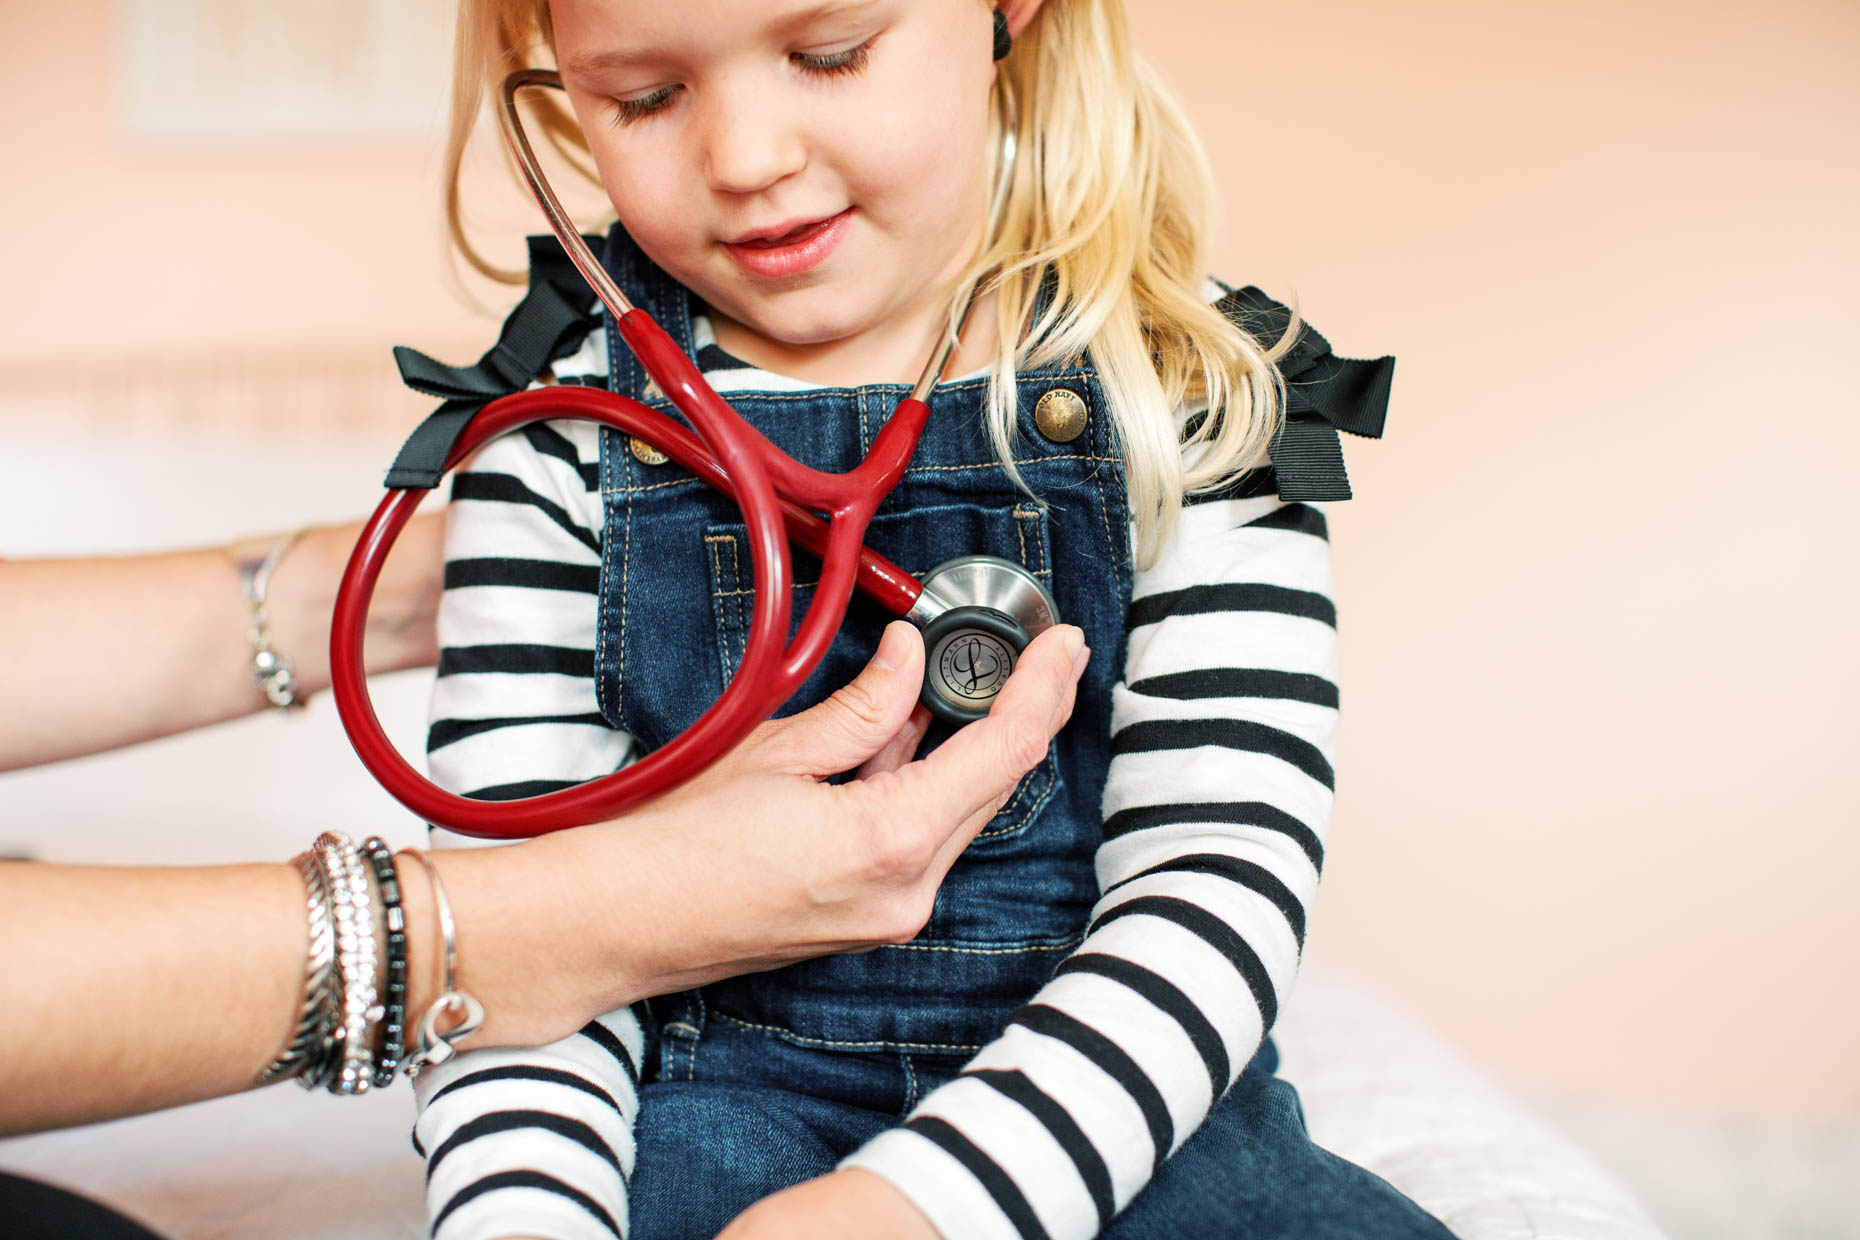 at home healthcare stethoscope young girl